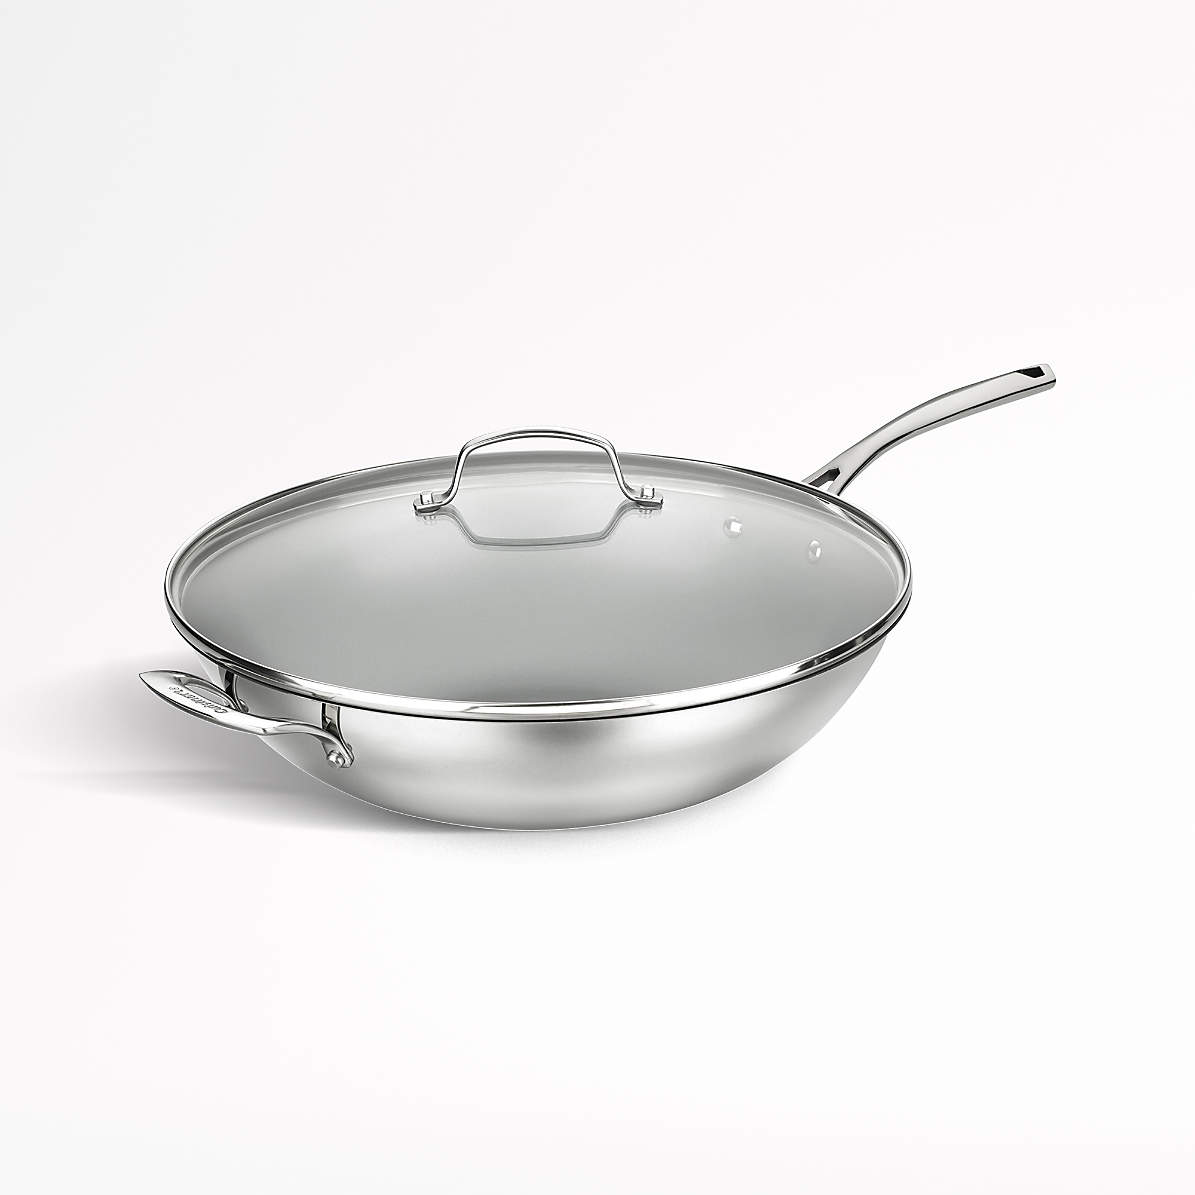 Cuisinart Chef's Classic Stainless Stir-Fry Pan with Glass Cover, 14